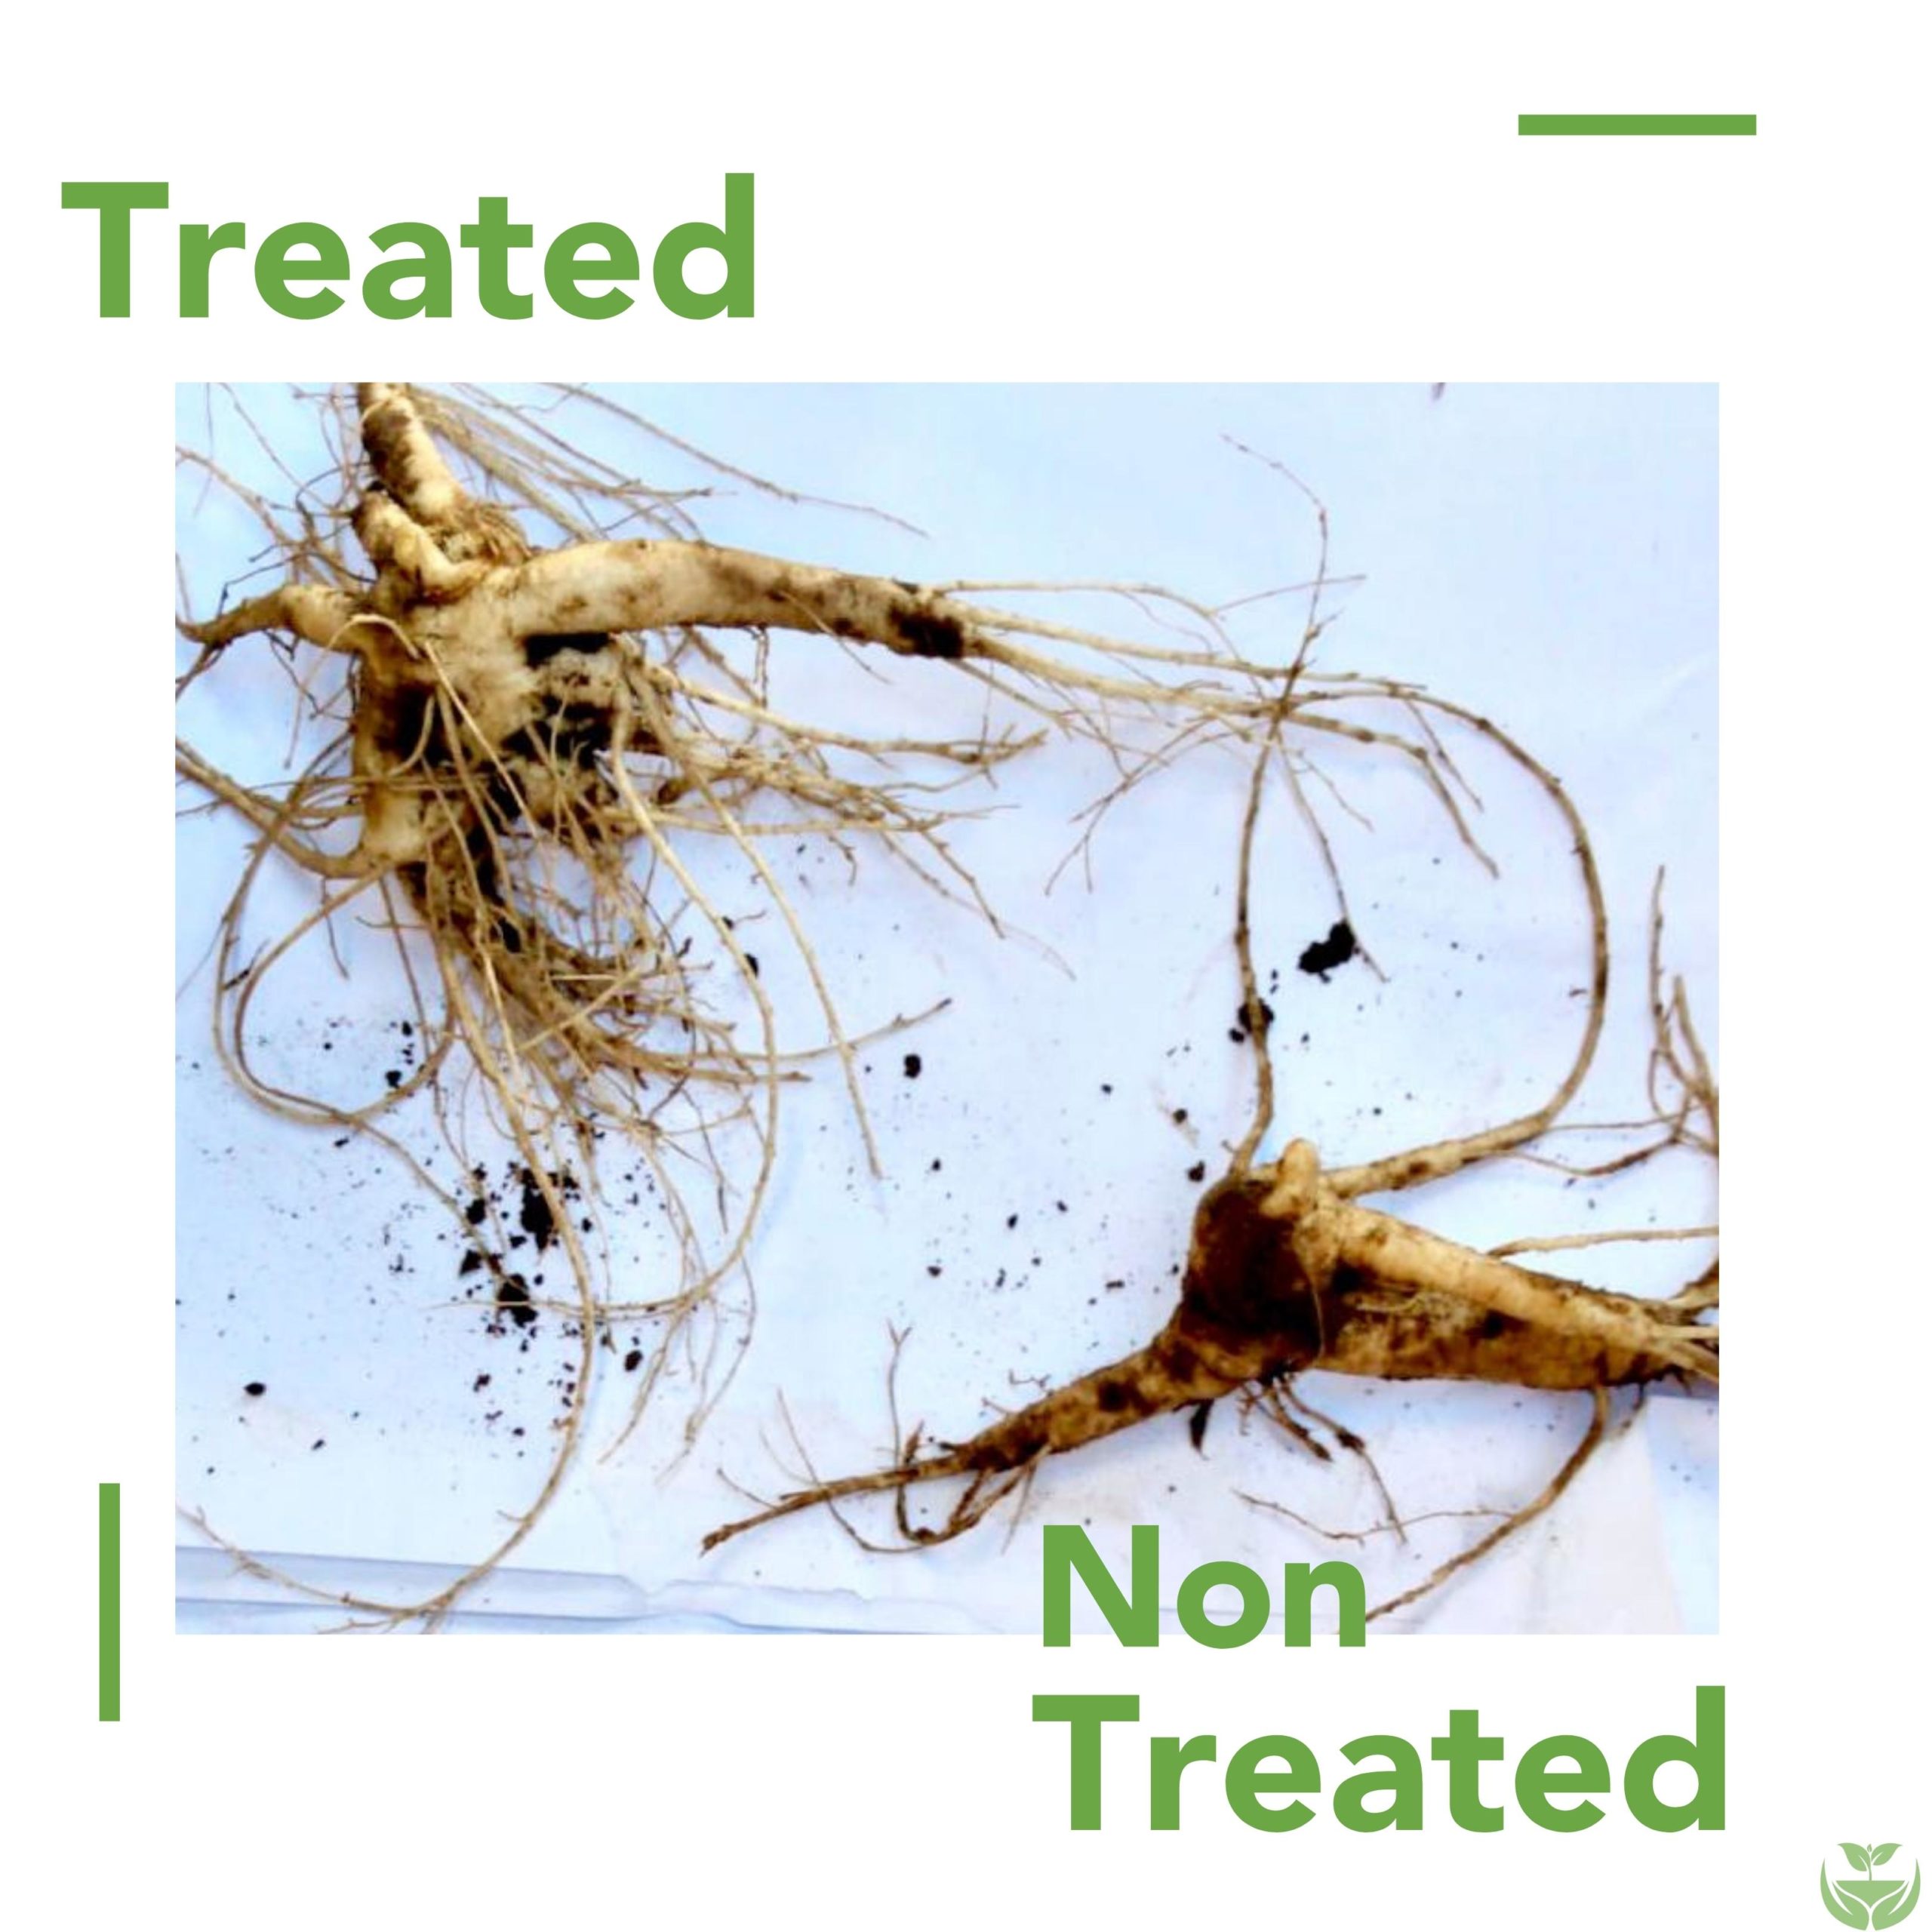 root comparison between treated and non-treated plants